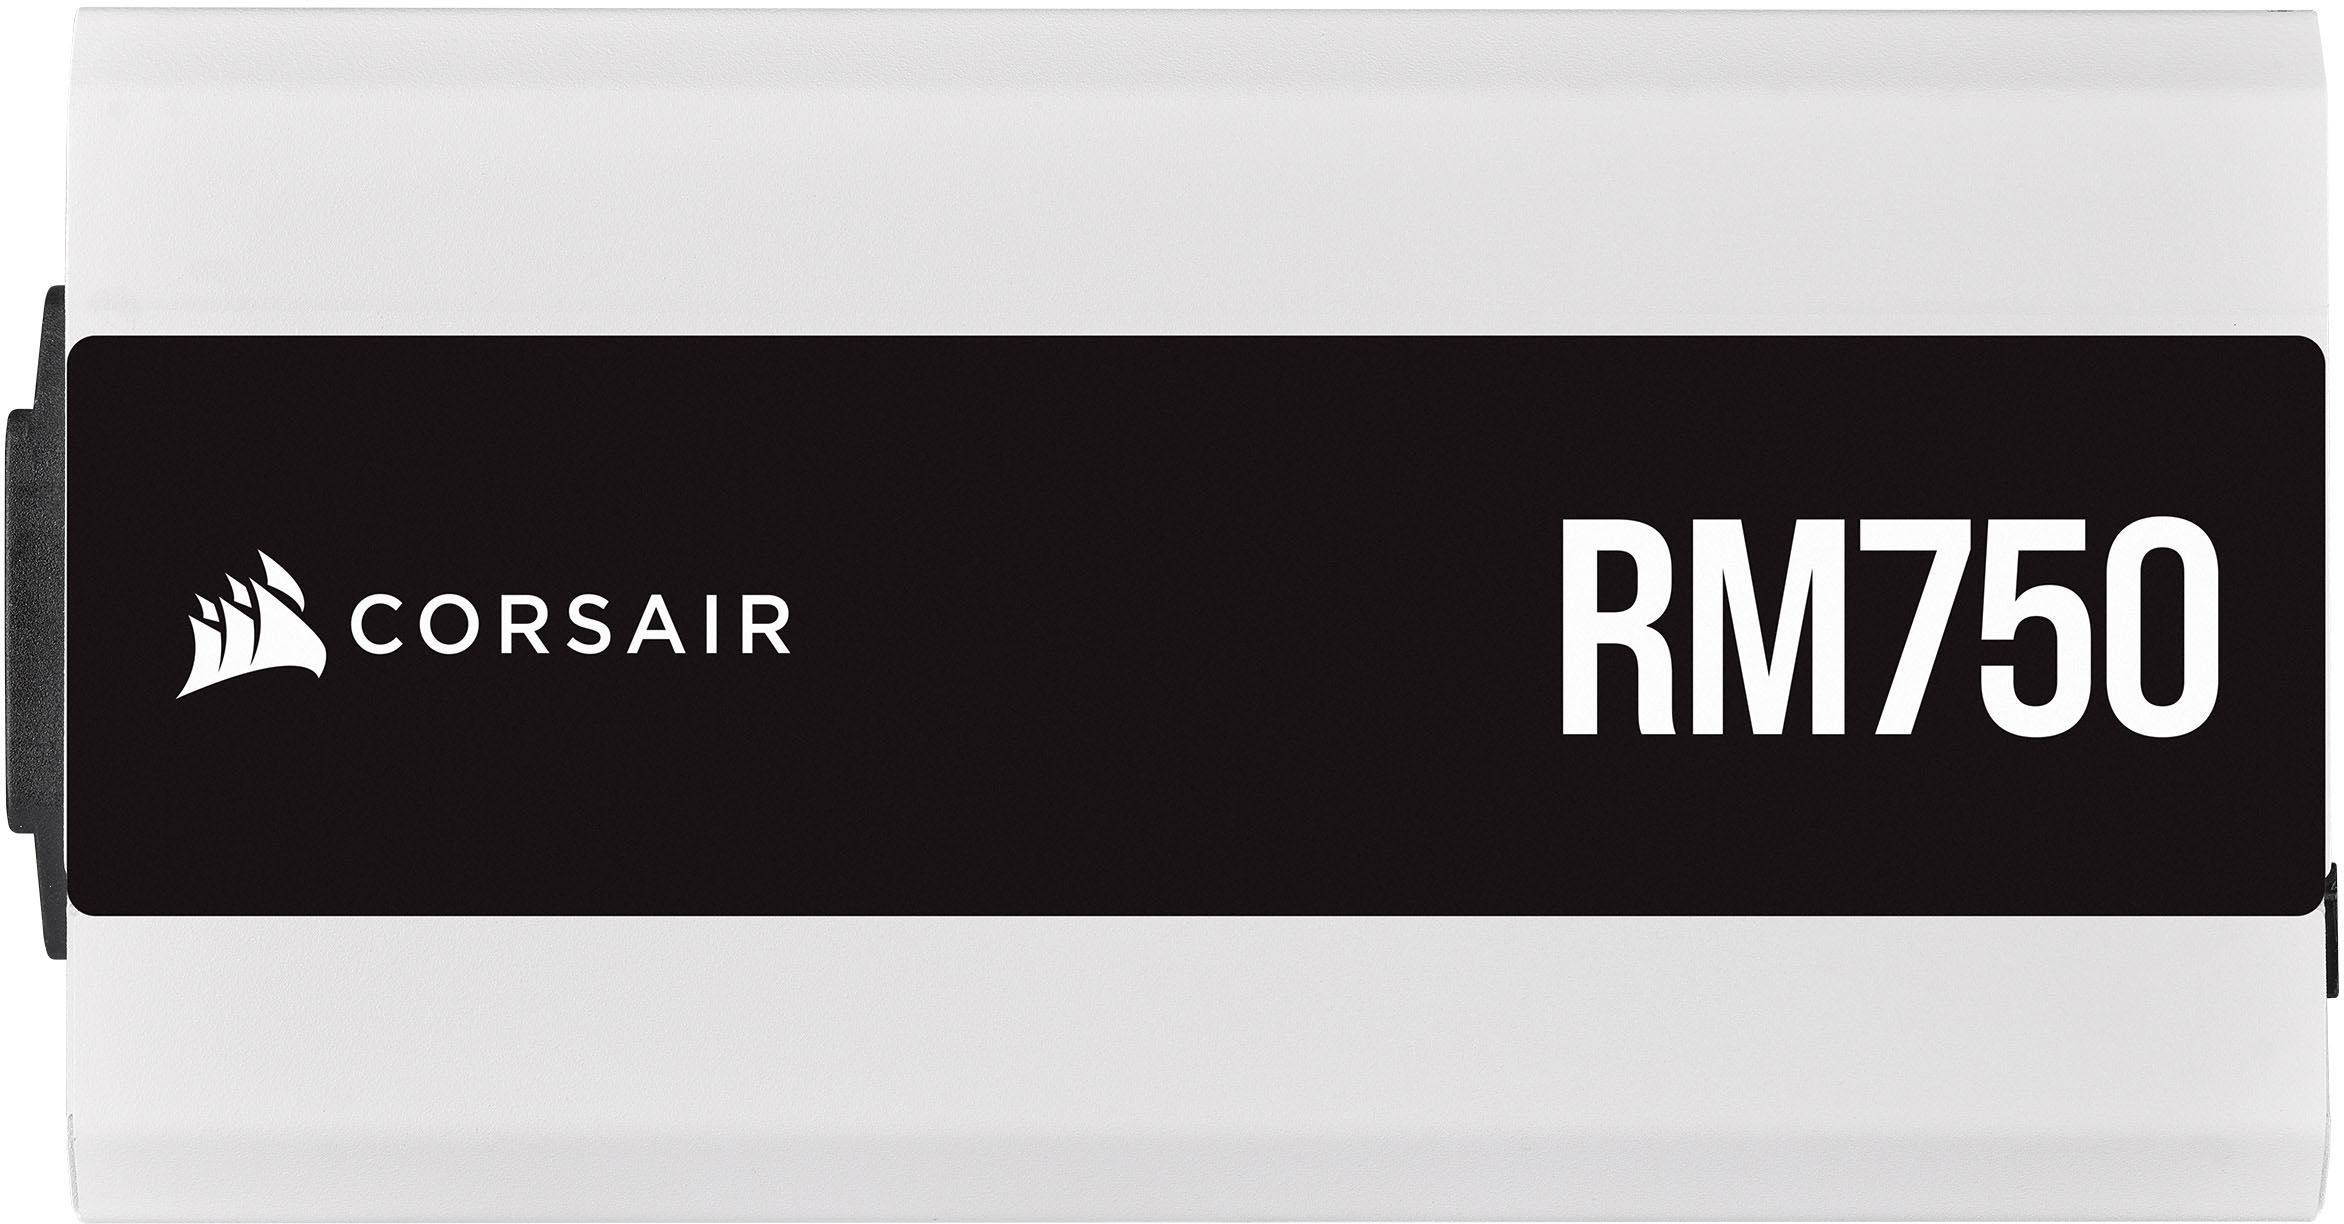  Corsair RM850e Fully Modular Low-Noise ATX Power Supply (Dual  EPS12V Connectors, 105°C-Rated Capacitors, 80 Plus Gold Efficiency, Modern  Standby Support) Black : Electronics